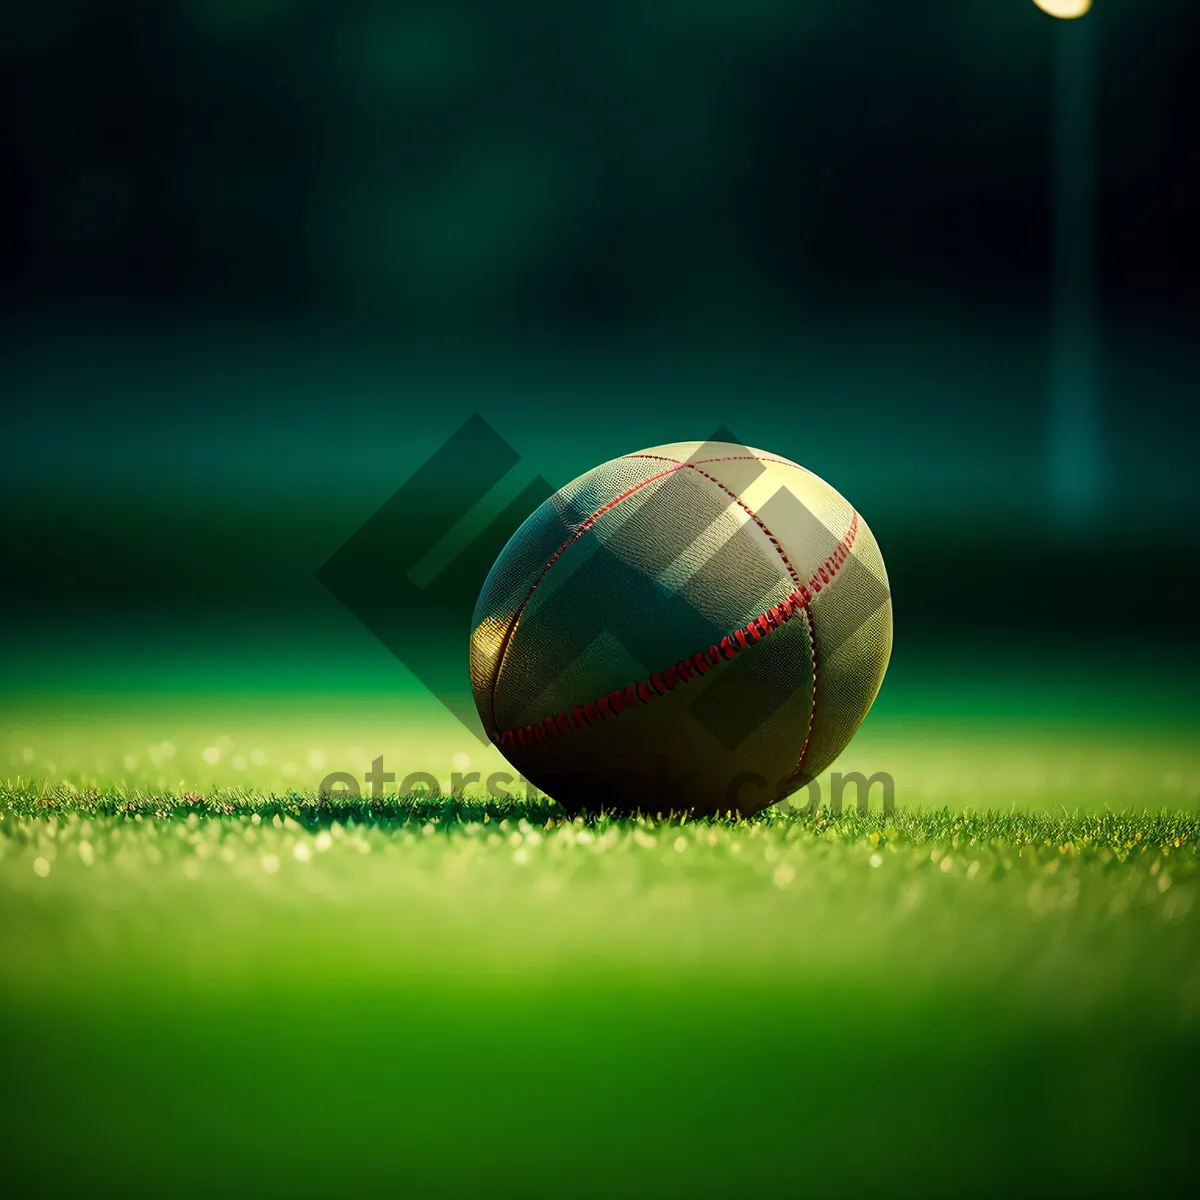 Picture of World Soccer | Competition Game Equipment on Grass